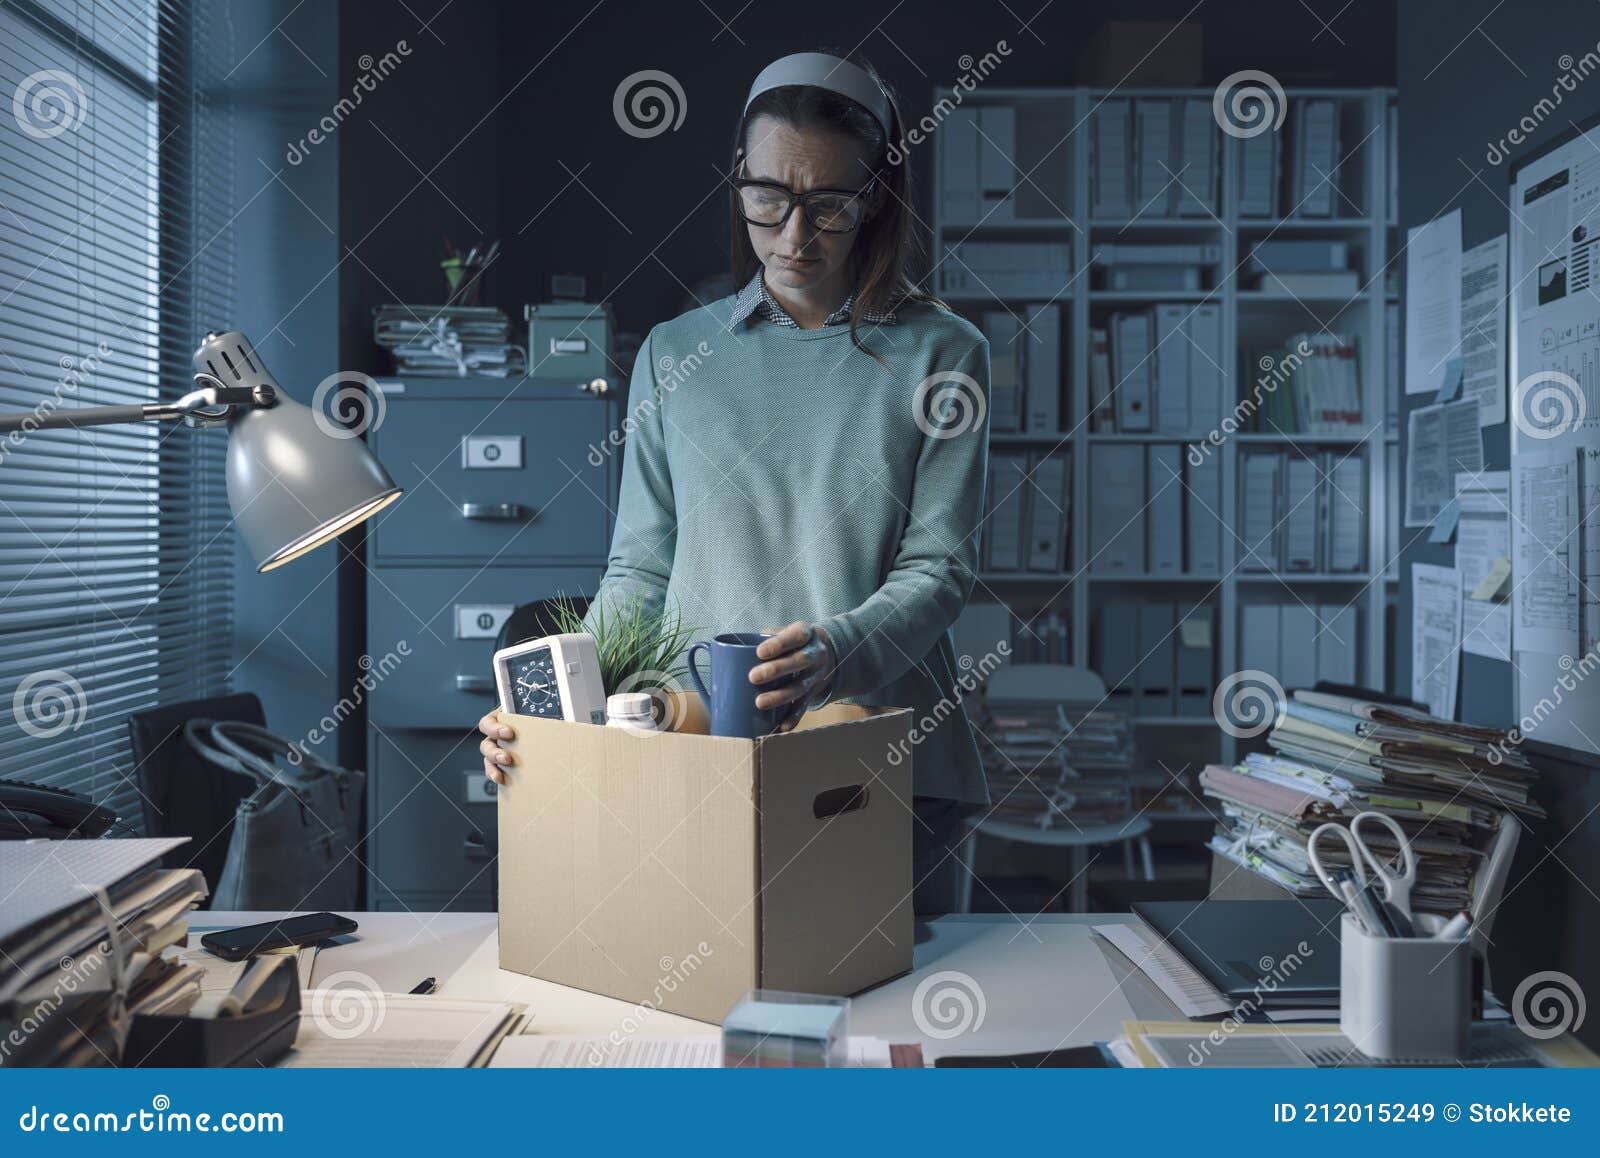 Sad Woman Packing Her Belongings In The Office Stock Image Image Of Businesswoman Indoors